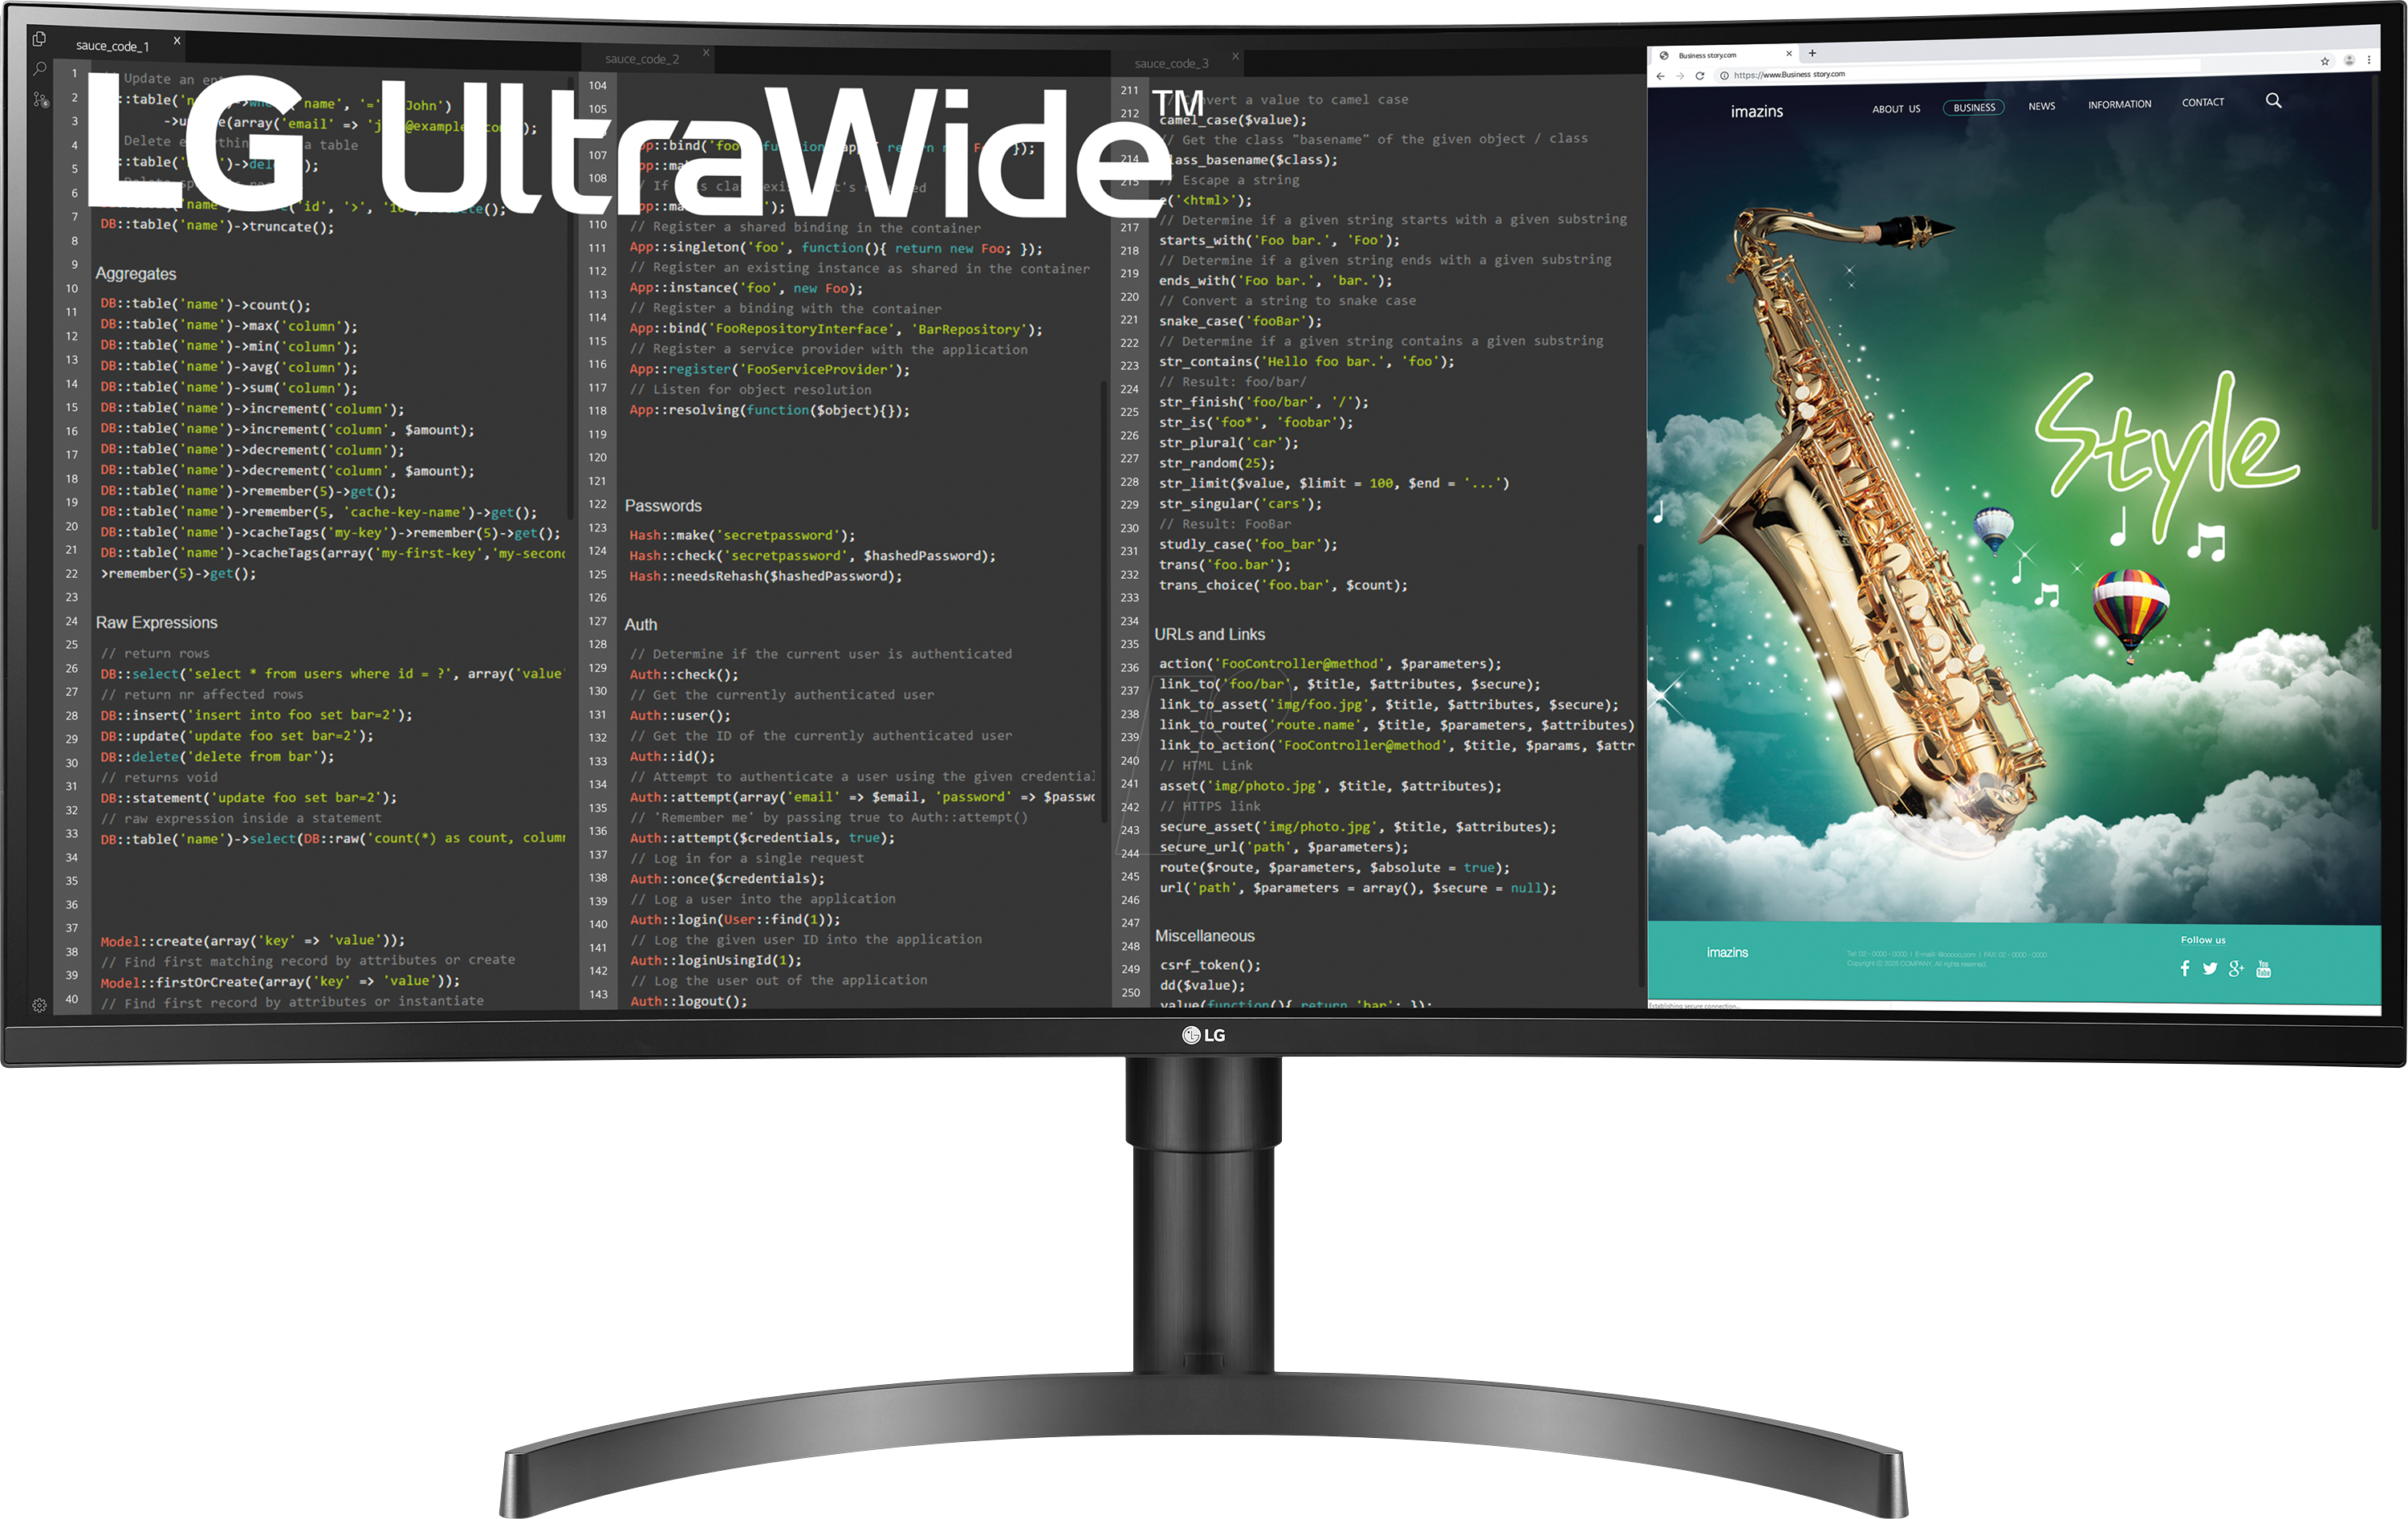 35WN75C: 89-cm Monitor, Curved, Speakers at